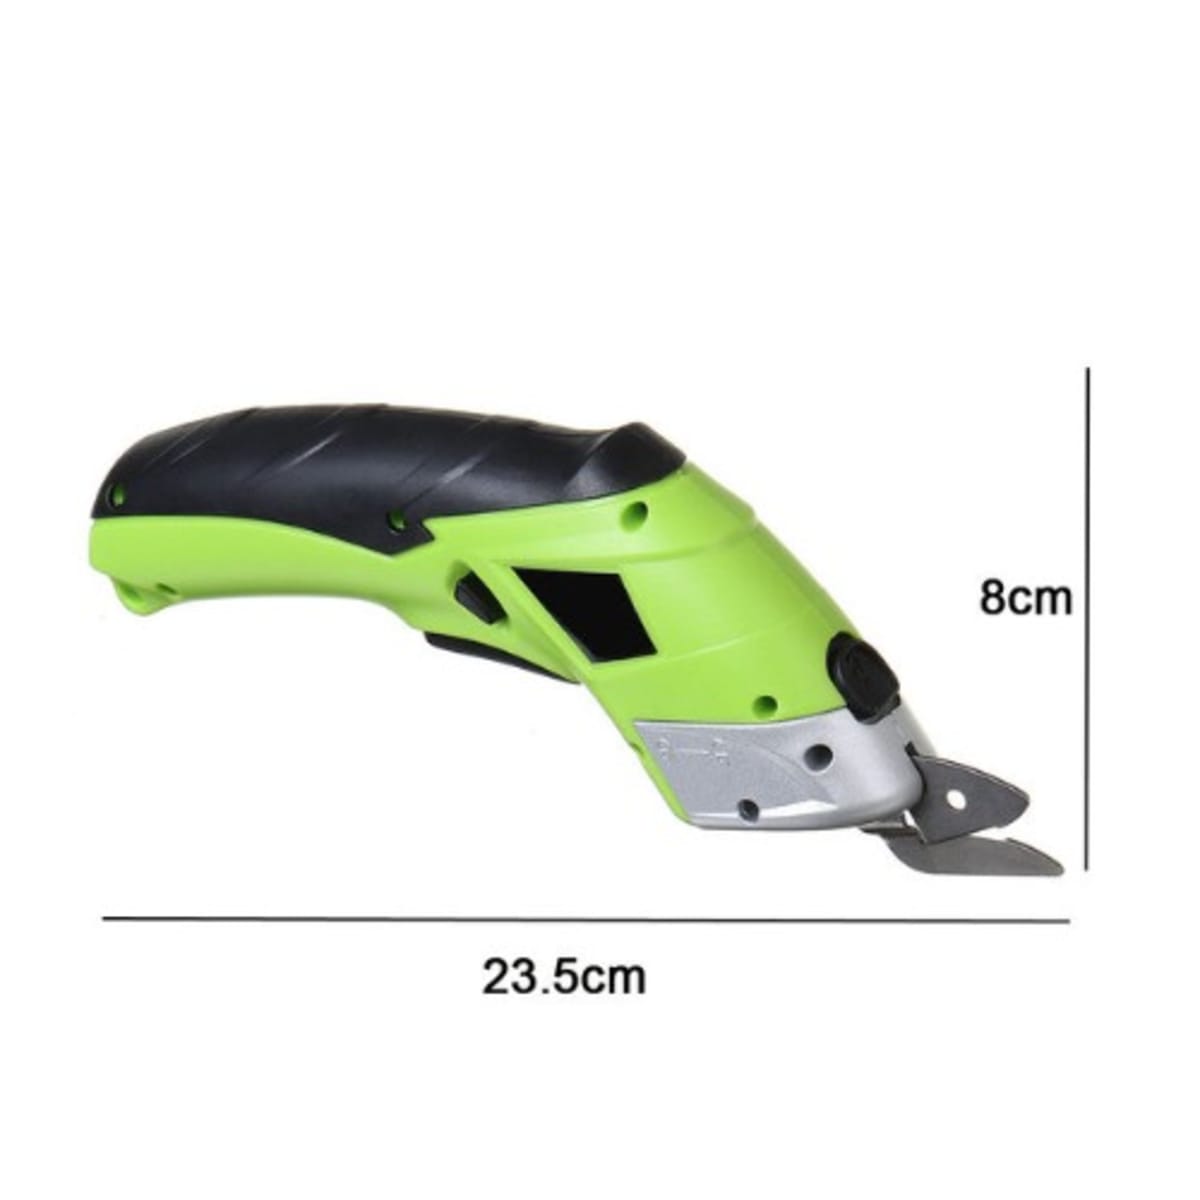 Cordless Electric Fabric Scissors Rechargeable Tool Portable Small